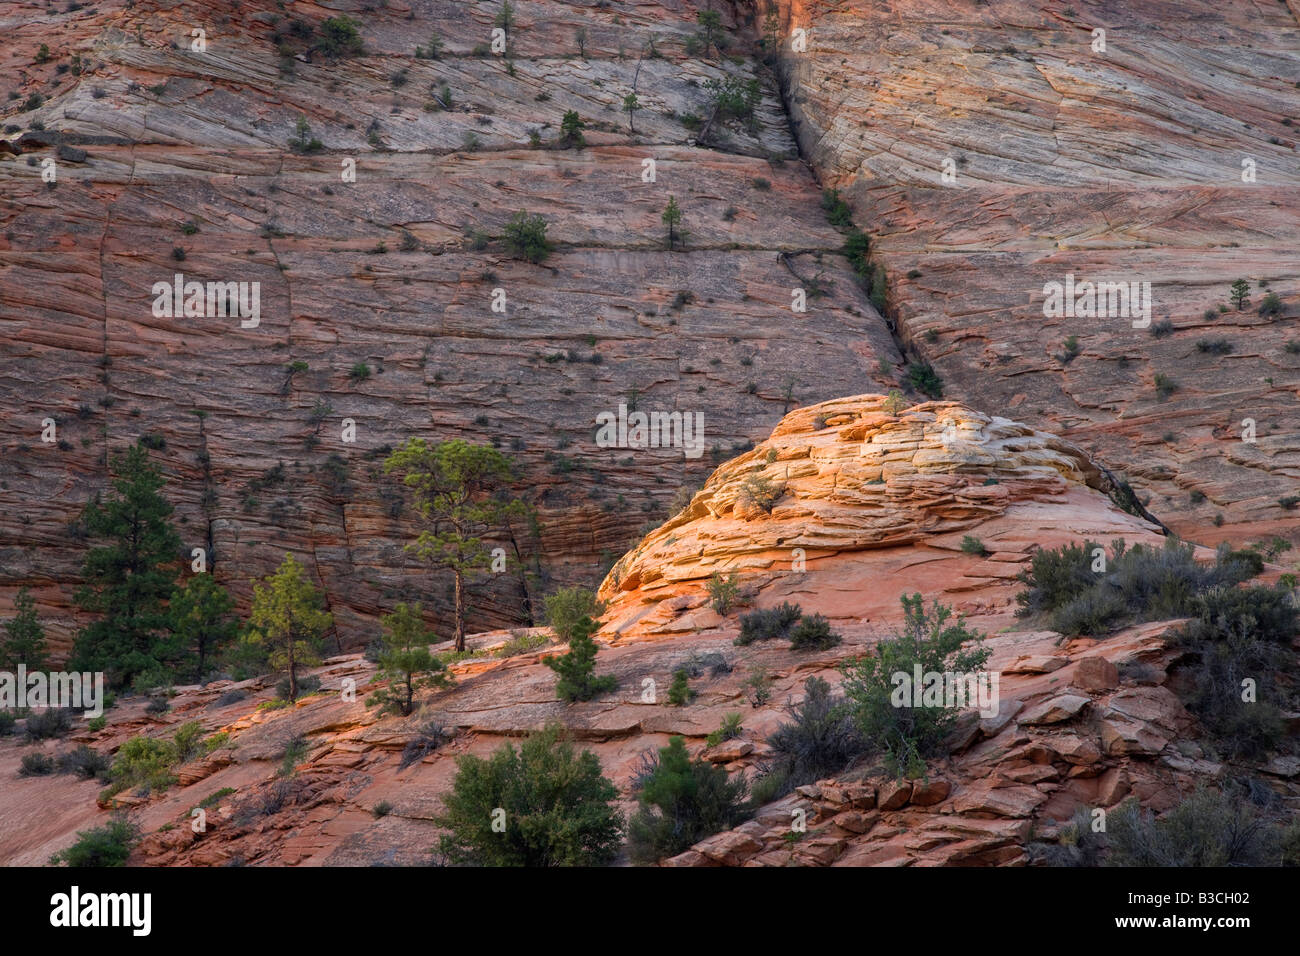 patterns in petrified sand dunes, Zion National Park, Utah Stock Photo